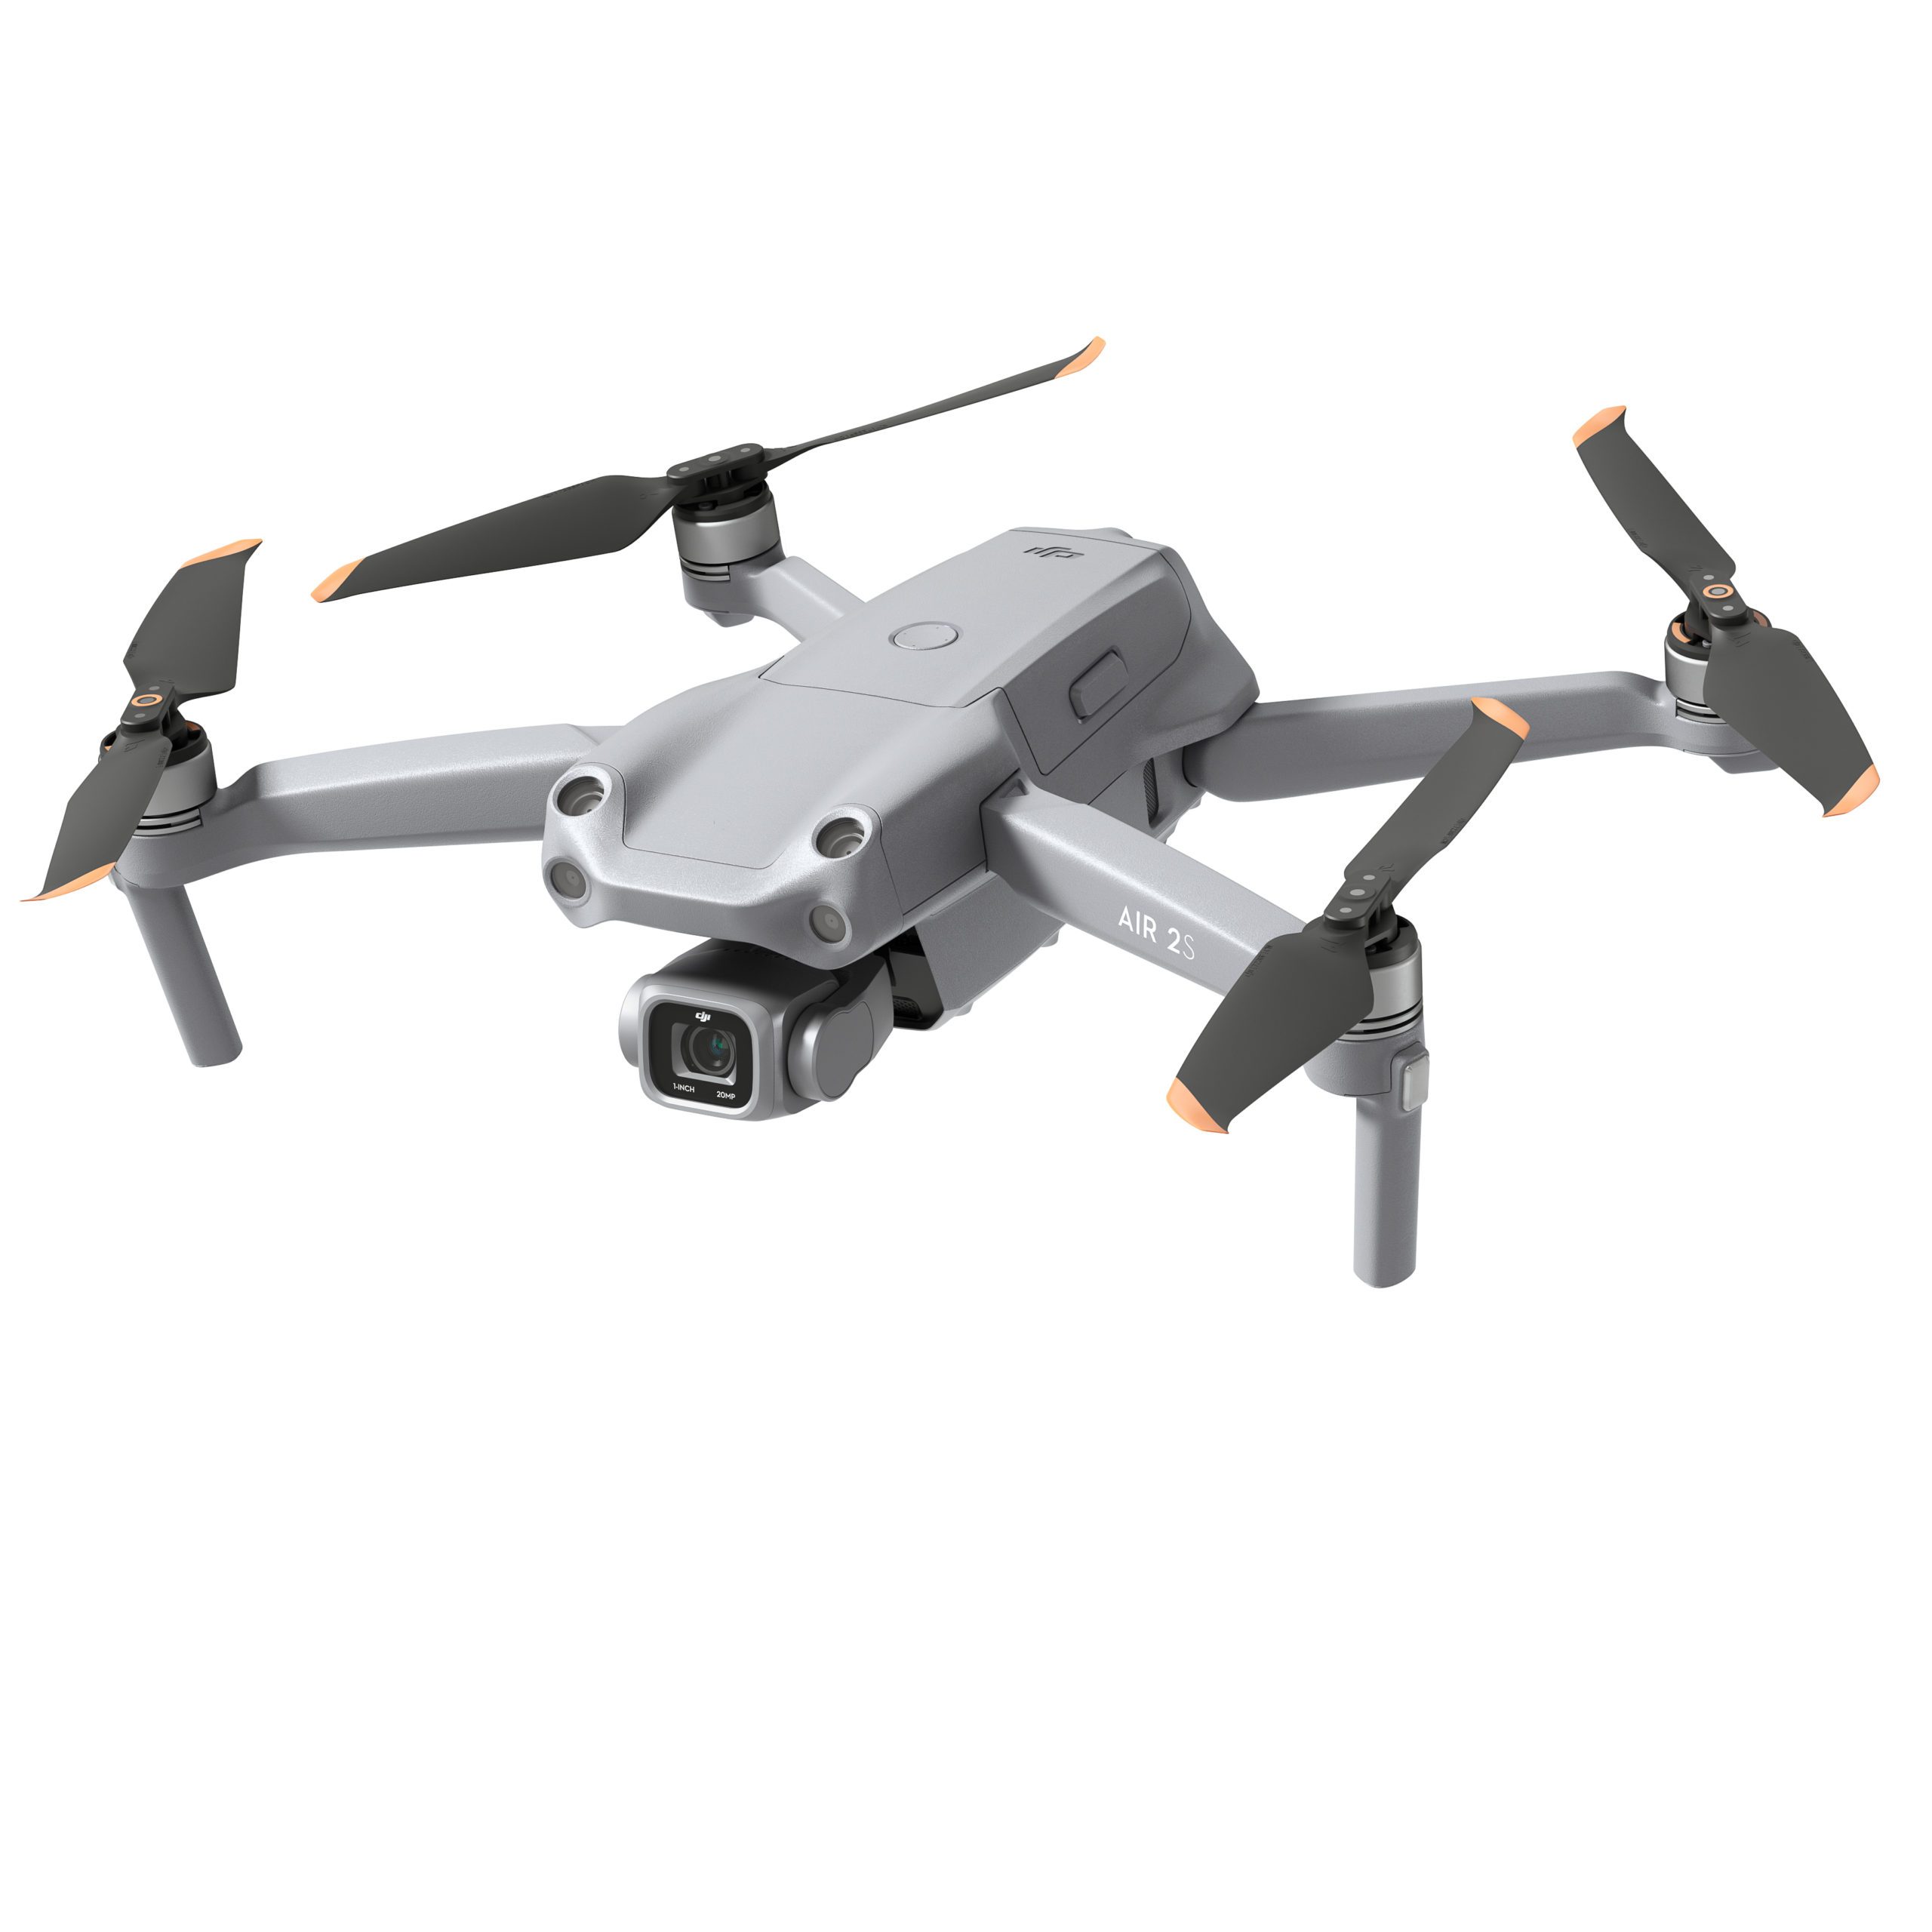 designer syv Neuropati The New DJI drone Air 2S Launched Today - DRONELIFE